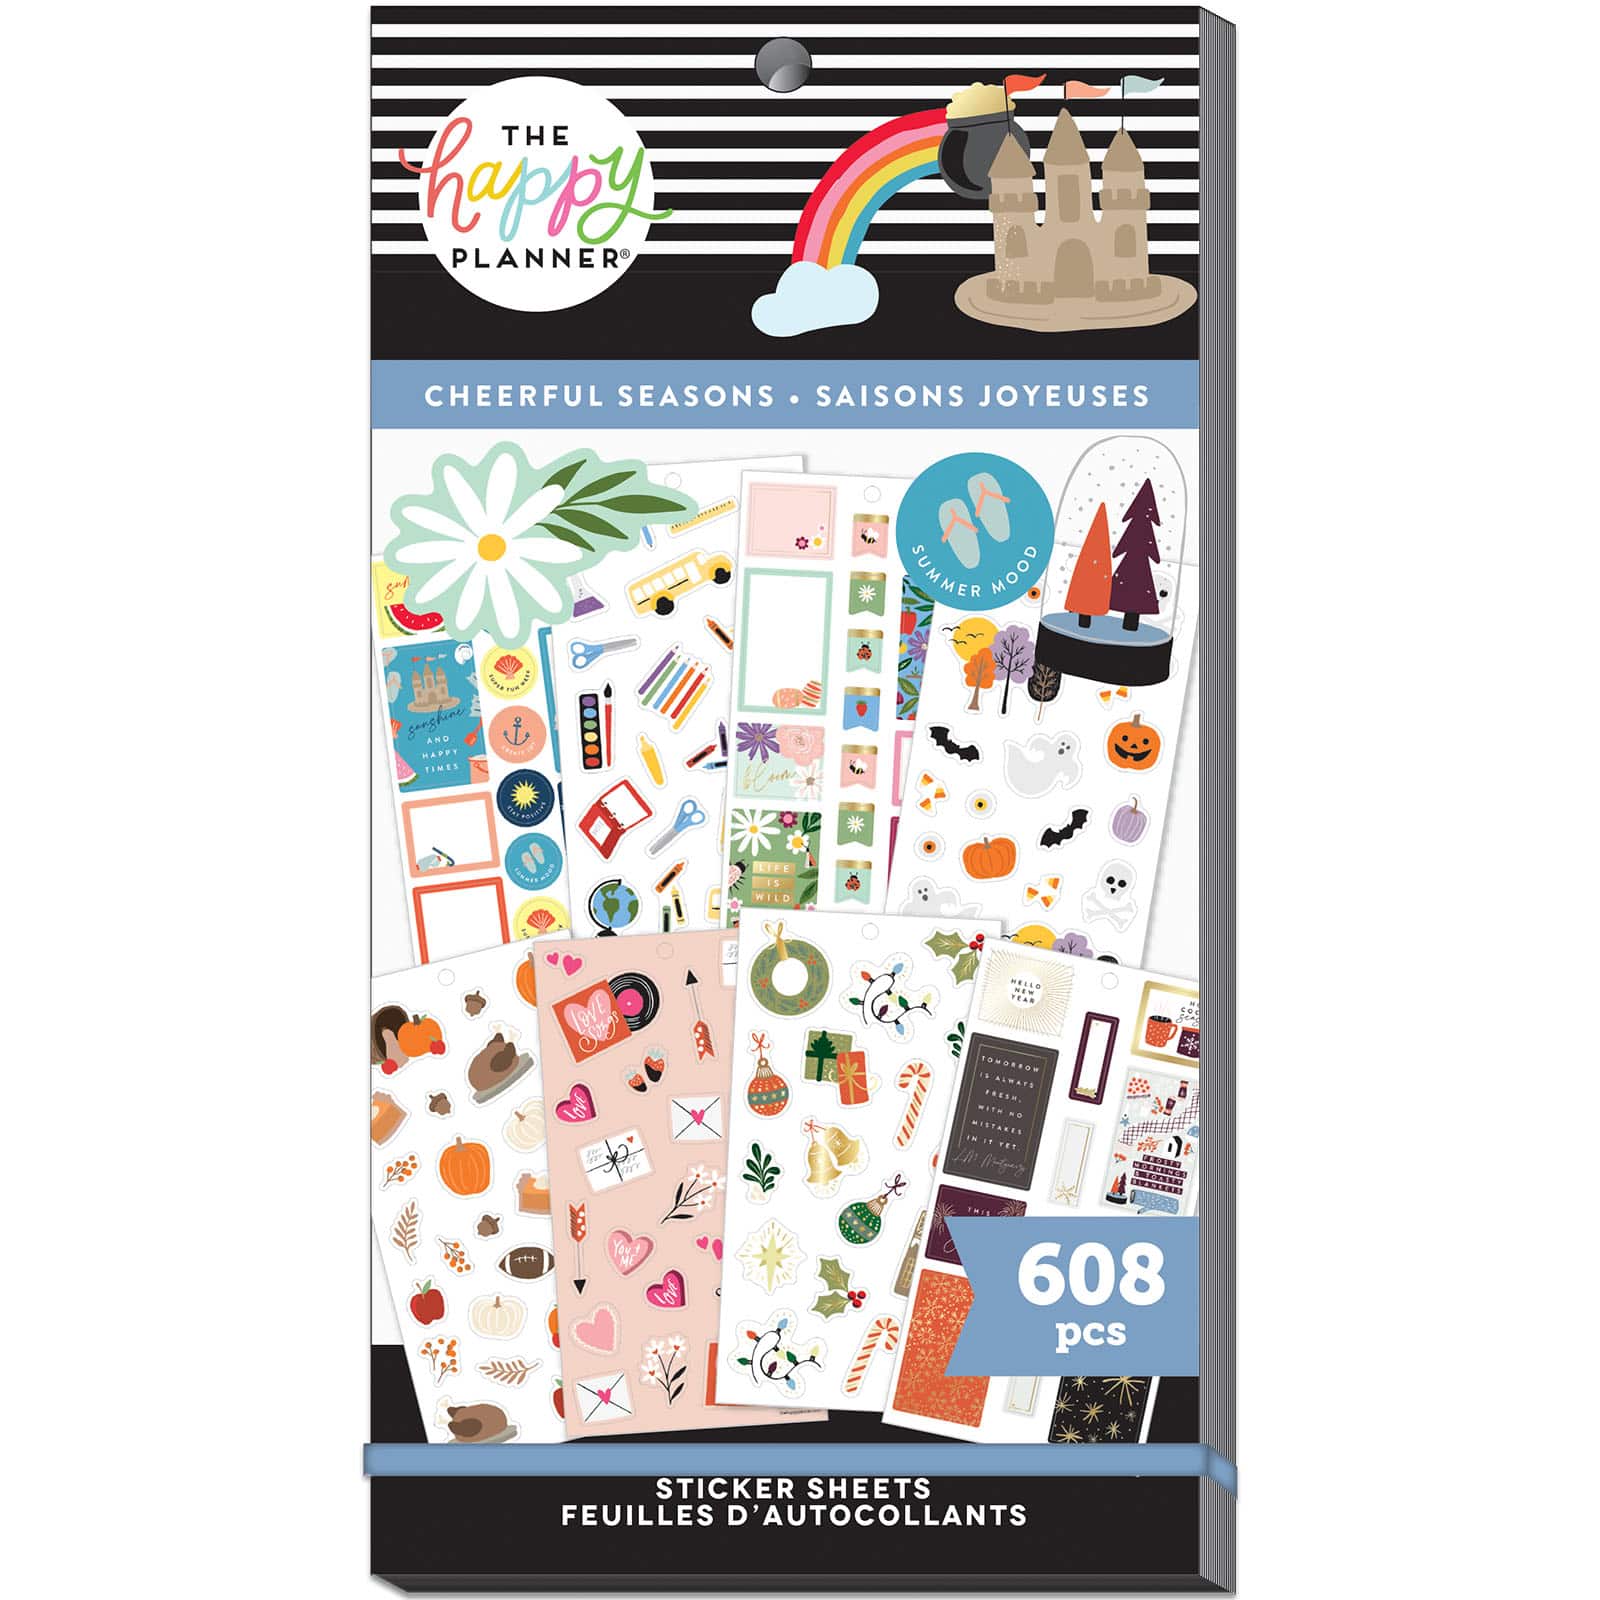 Steak stickers for planners, ID 0272 – mamagloriashop